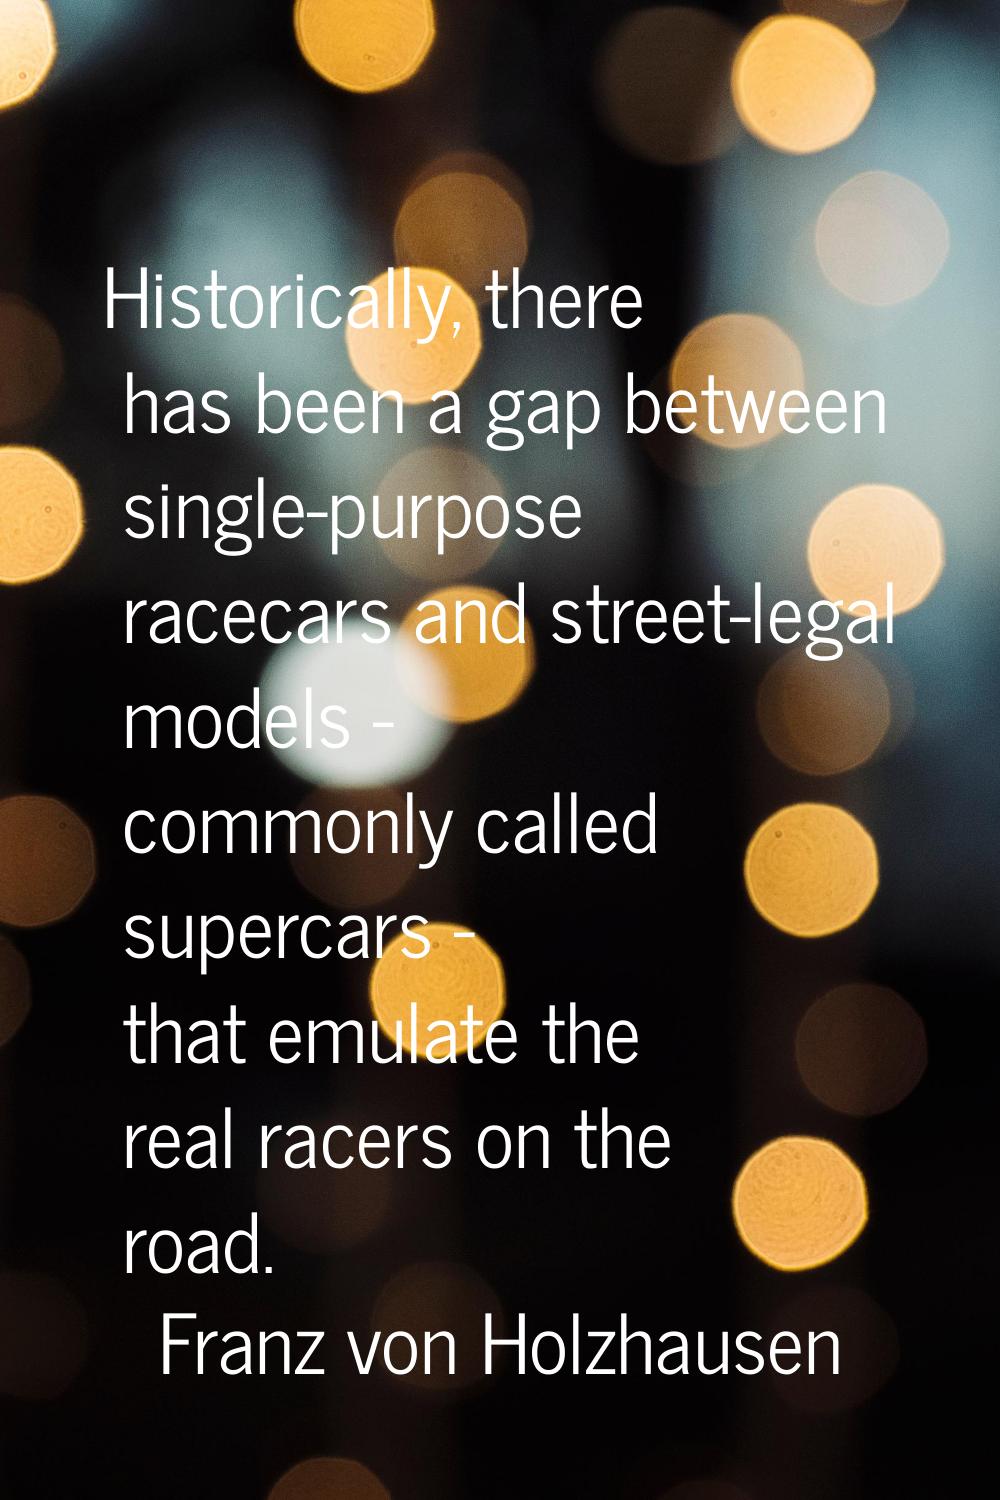 Historically, there has been a gap between single-purpose racecars and street-legal models - common